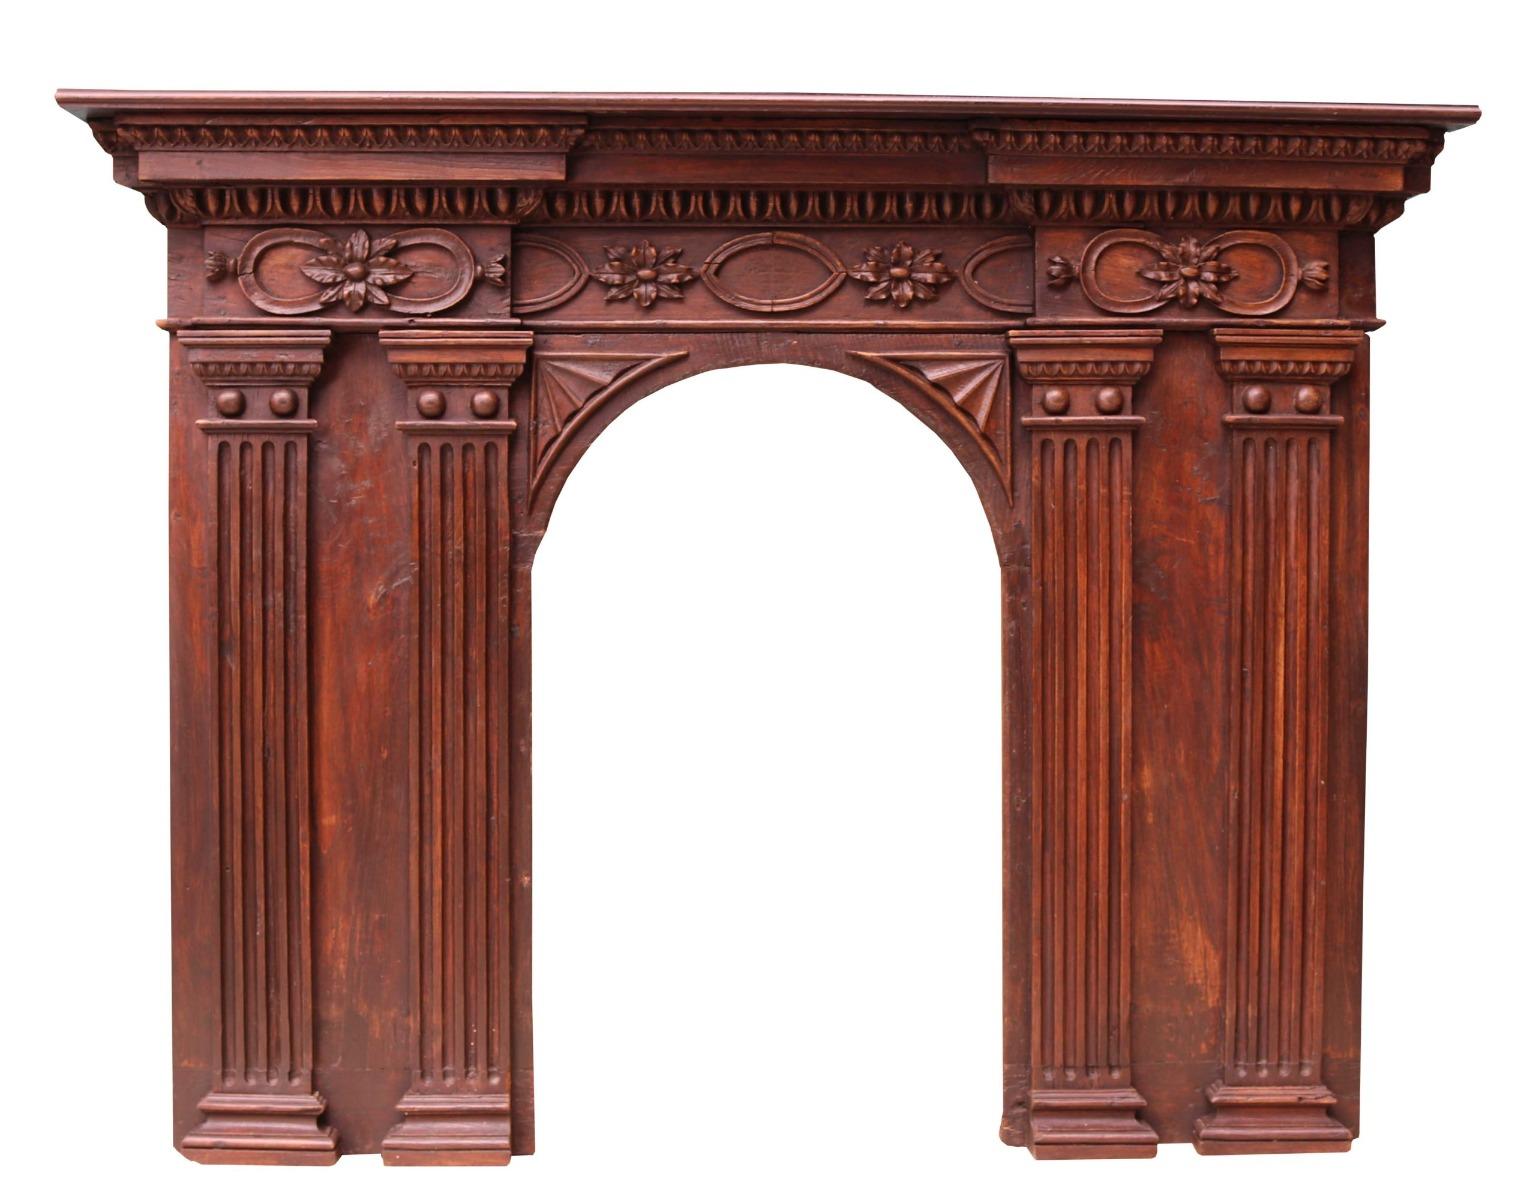 A good quality wooden fire surround with arched opening. Carved frieze panel.

Opening height 86 cm

Opening width 51 cm

Width between legs 131.5 cm.